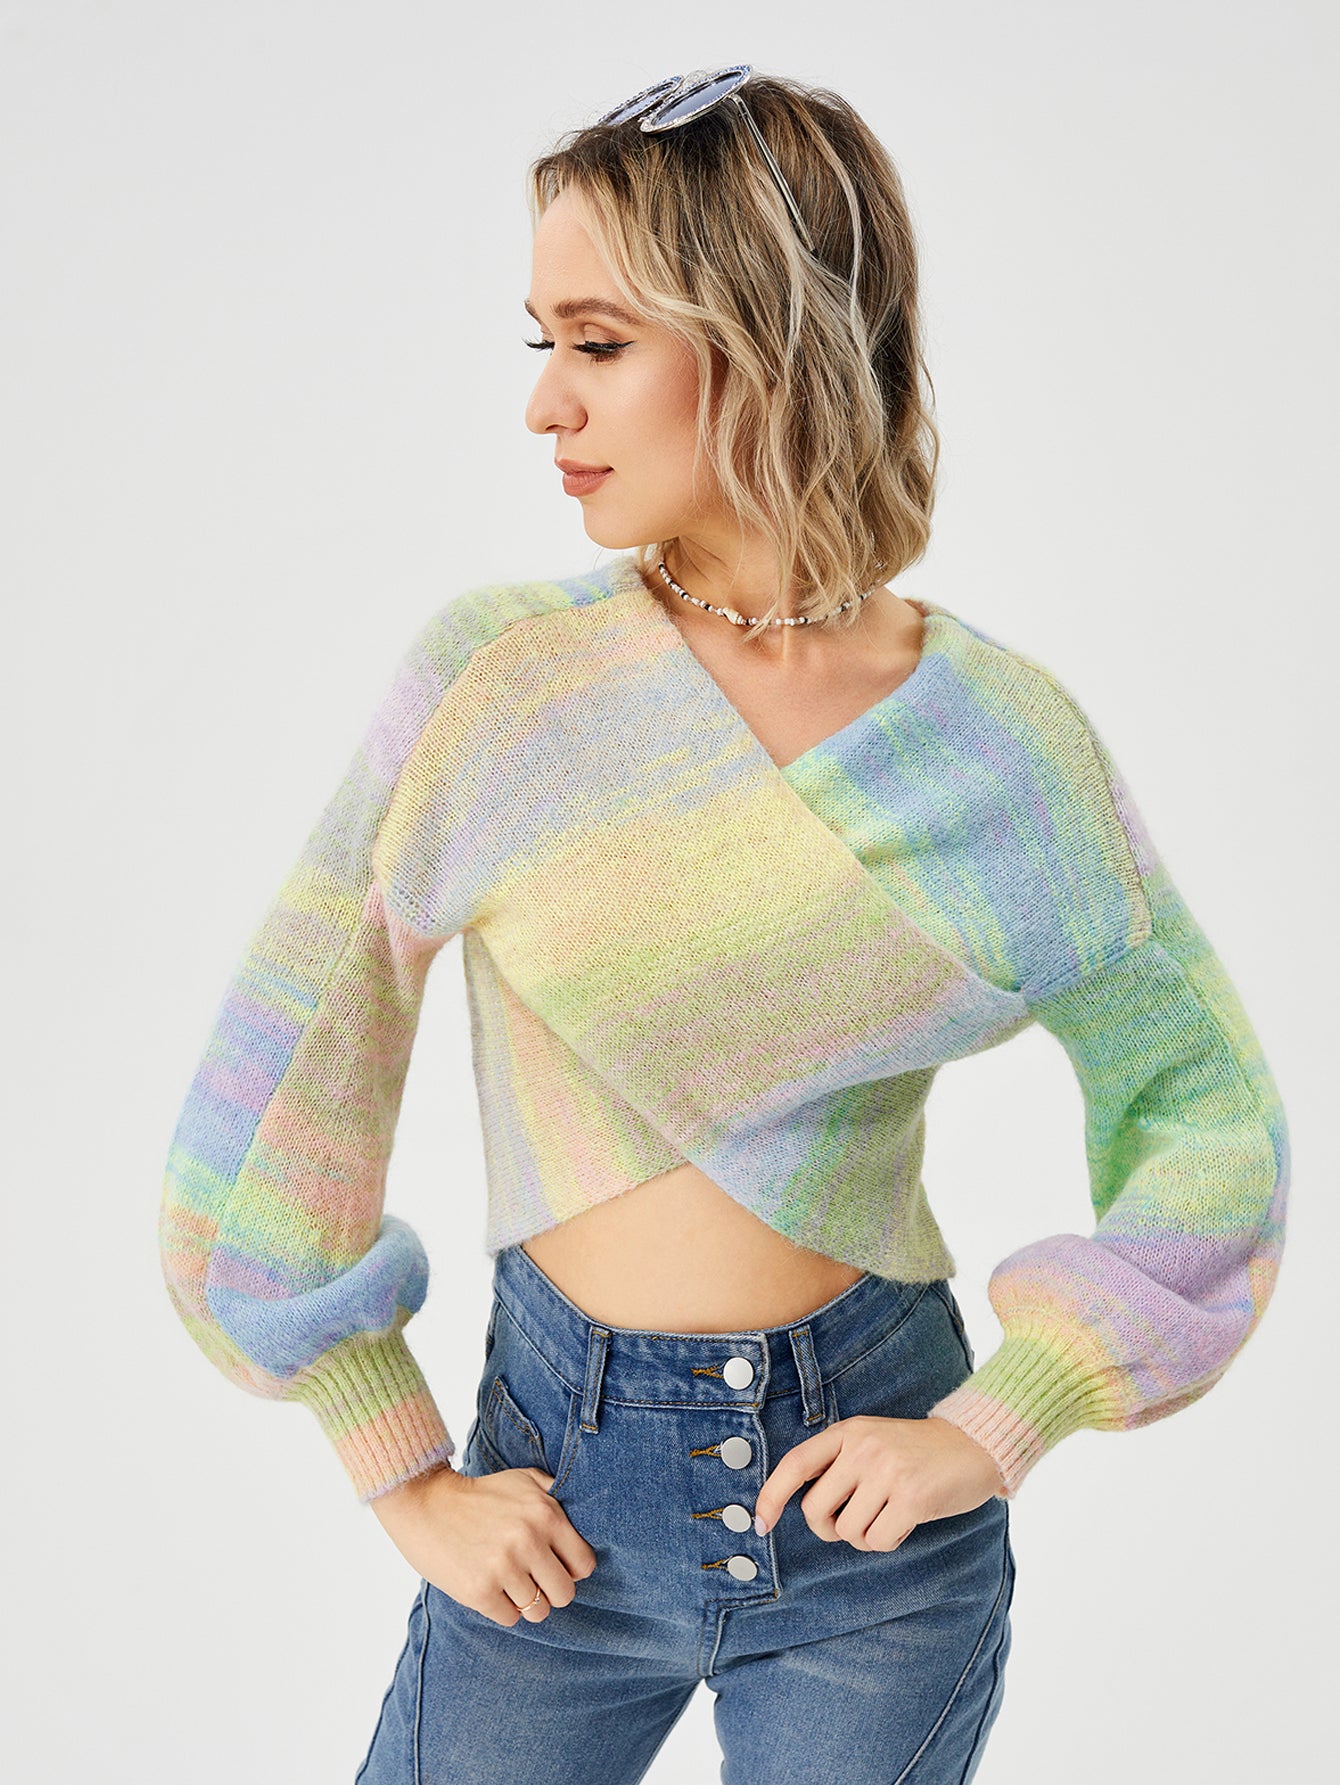 Women's Loose Casual Rainbow Stretch Off Shoulder Sweater